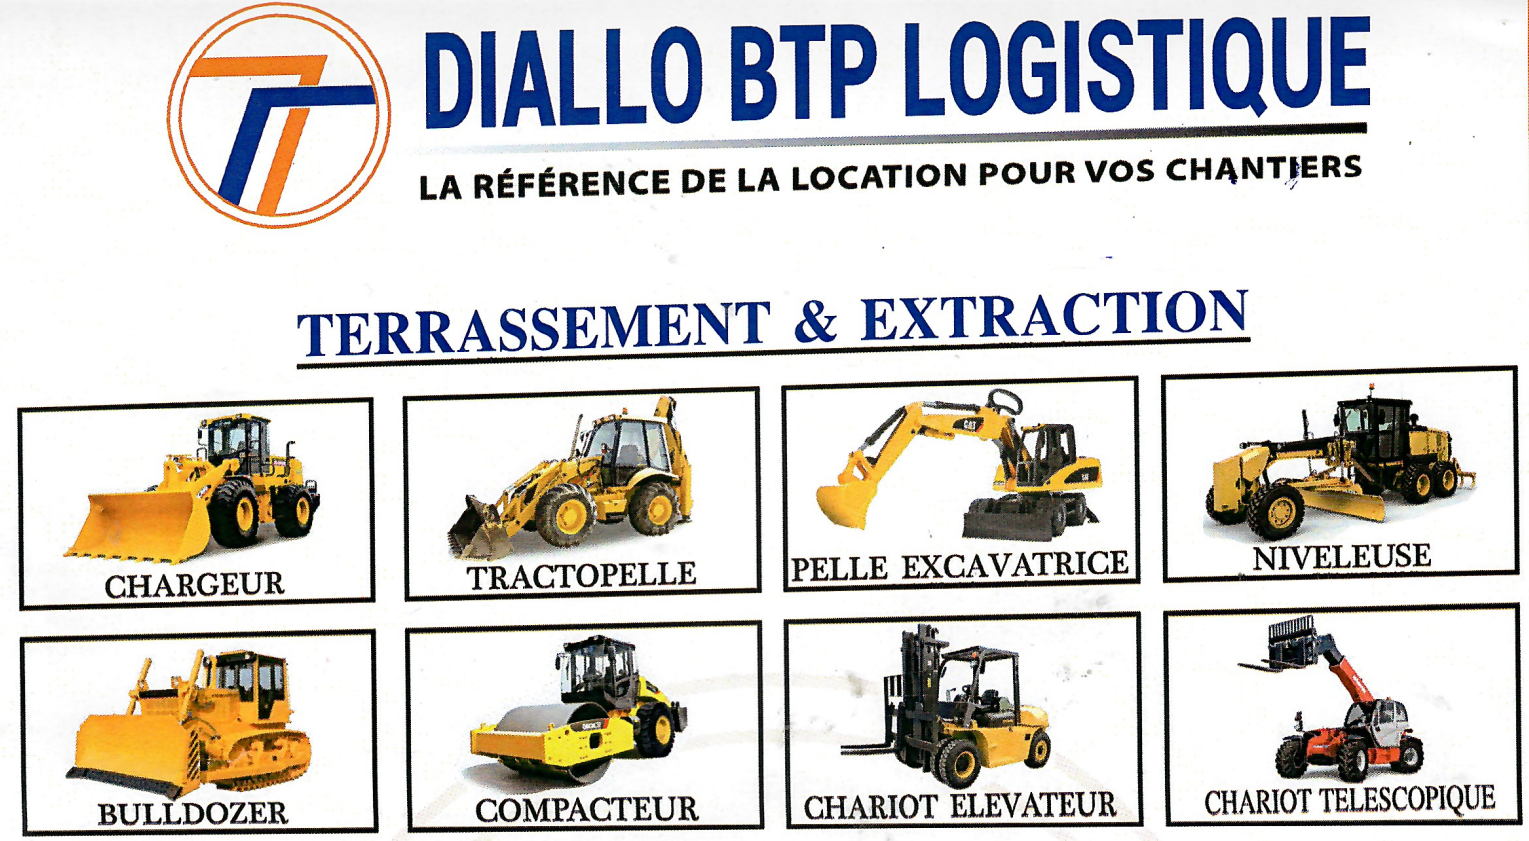 Rental of construction machinery in Senegal: DIALLO BTP Logistique - Your trusted partner in Dakar